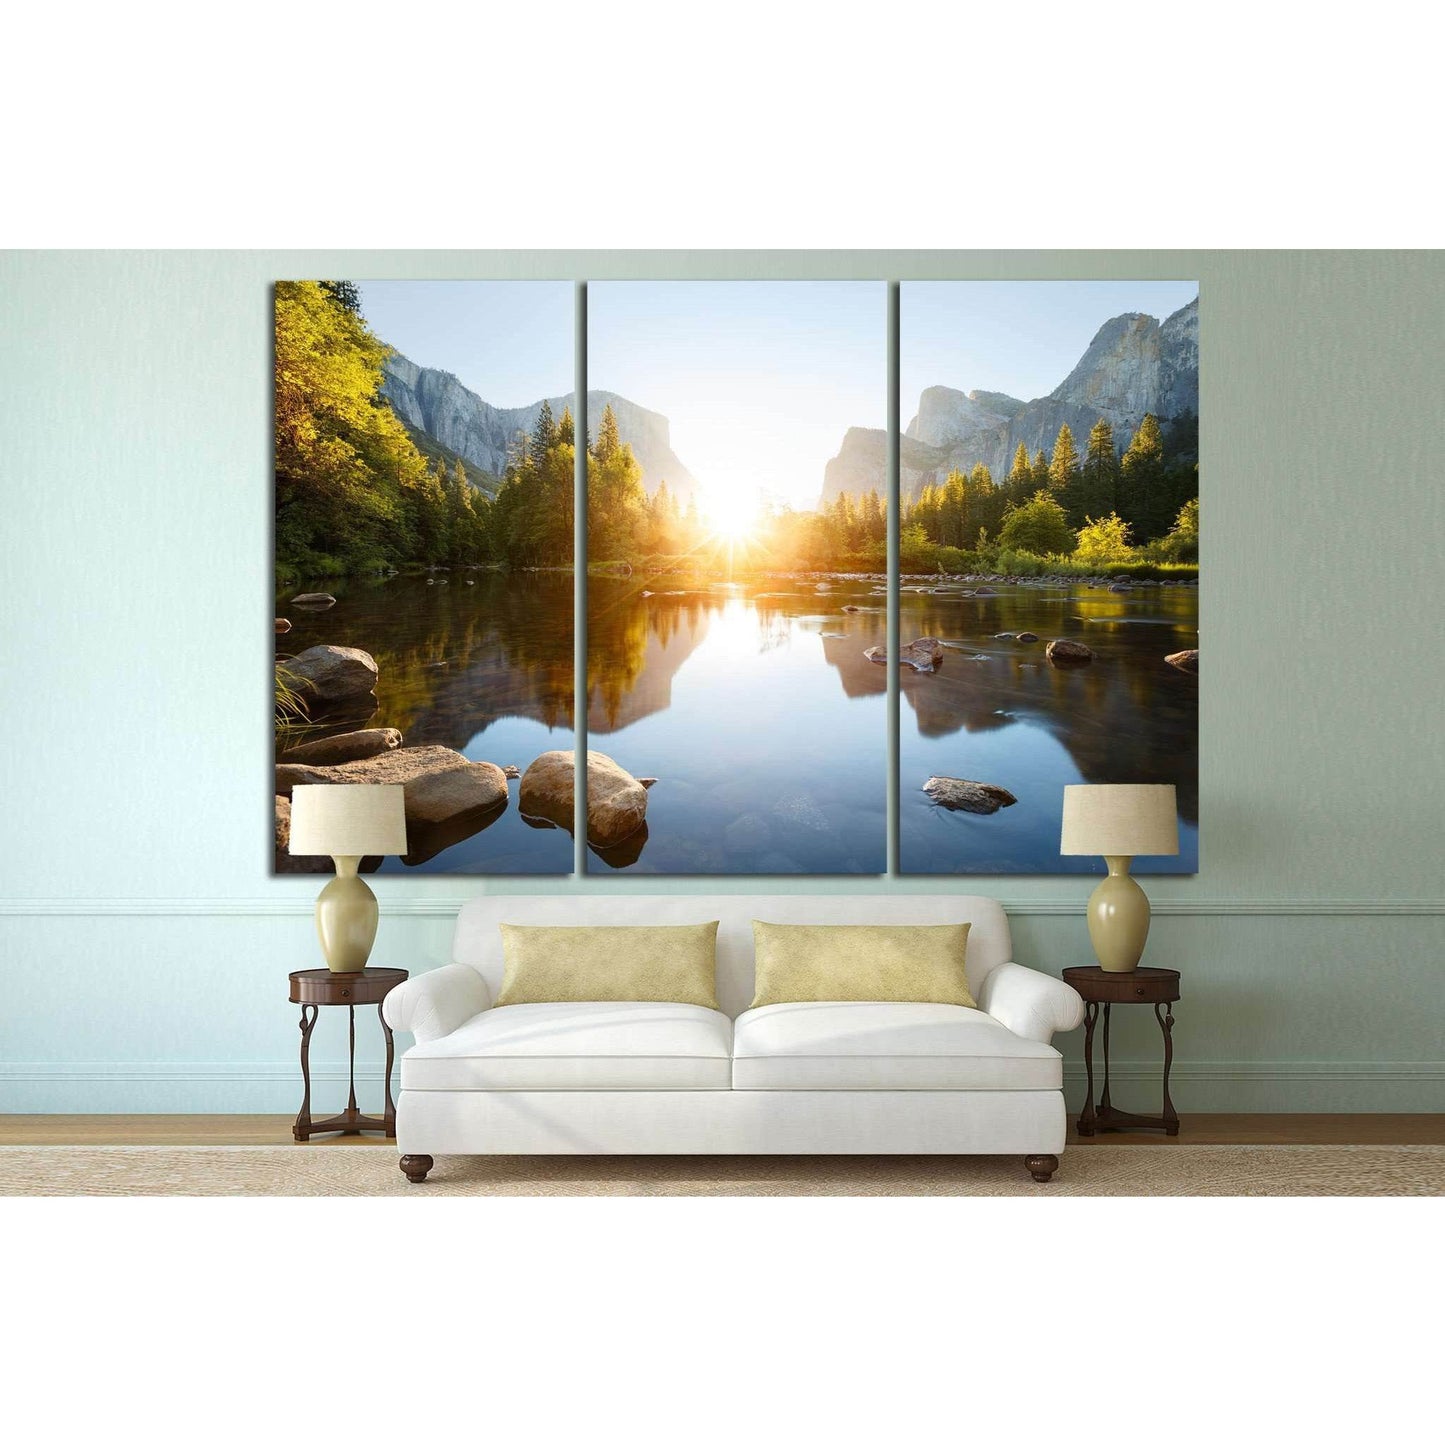 Granite Cliffs and River Reflection Wall Decor - Yosemite Landscape ArtworkThis canvas print offers a stunning portrayal of Yosemite Valley at sunrise, with the sun's first rays illuminating the granite cliffs and casting reflections on the calm waters of